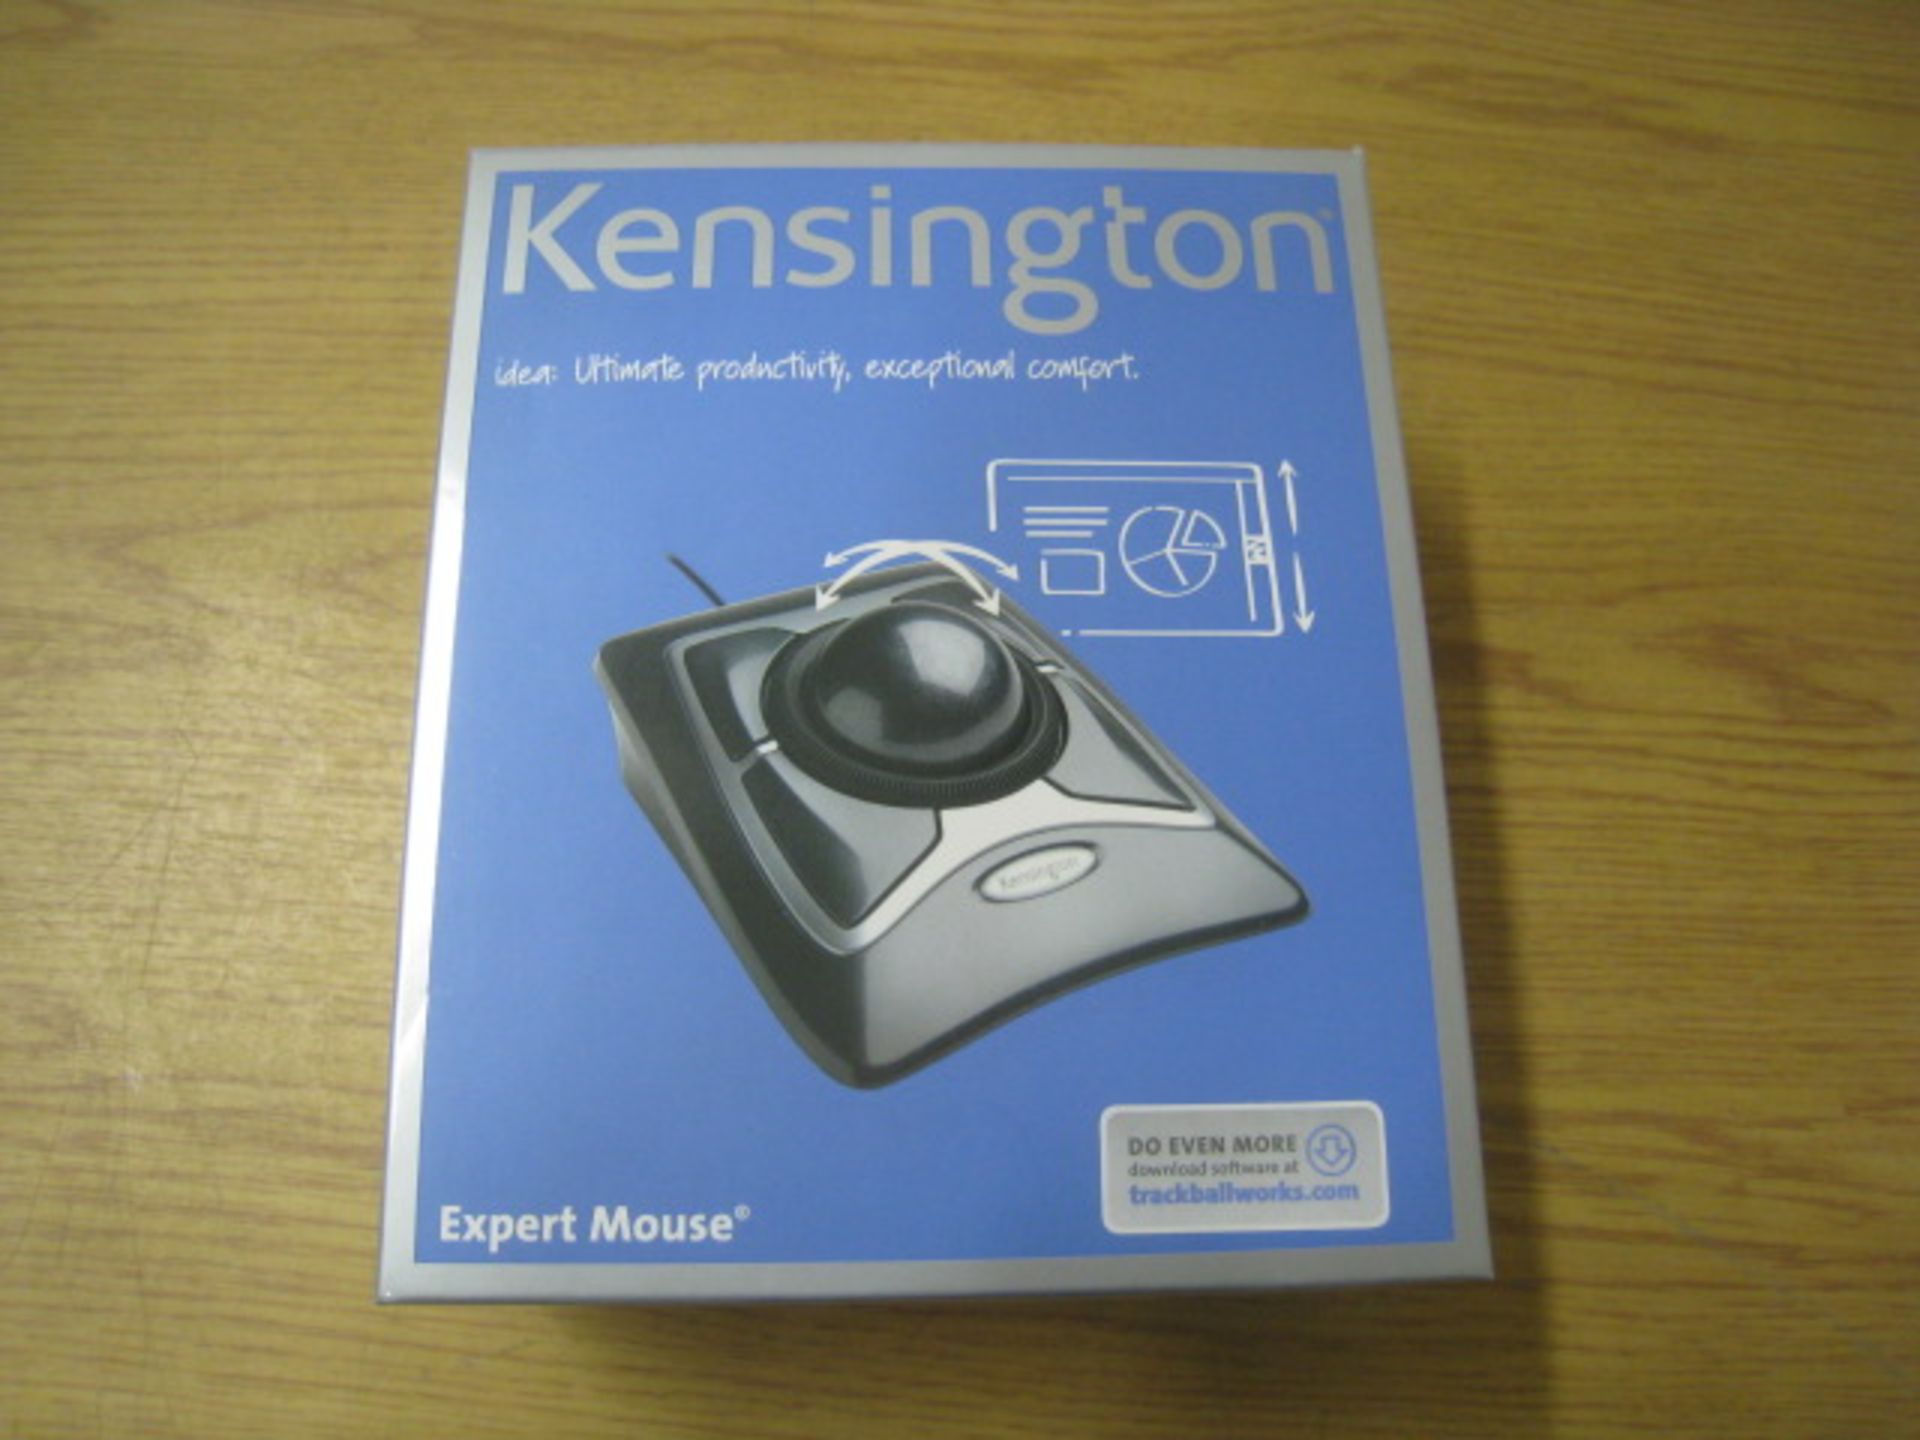 Boxed Kensington Expert Mouse Optical Wired USB Trackball for PC and Mac - Black